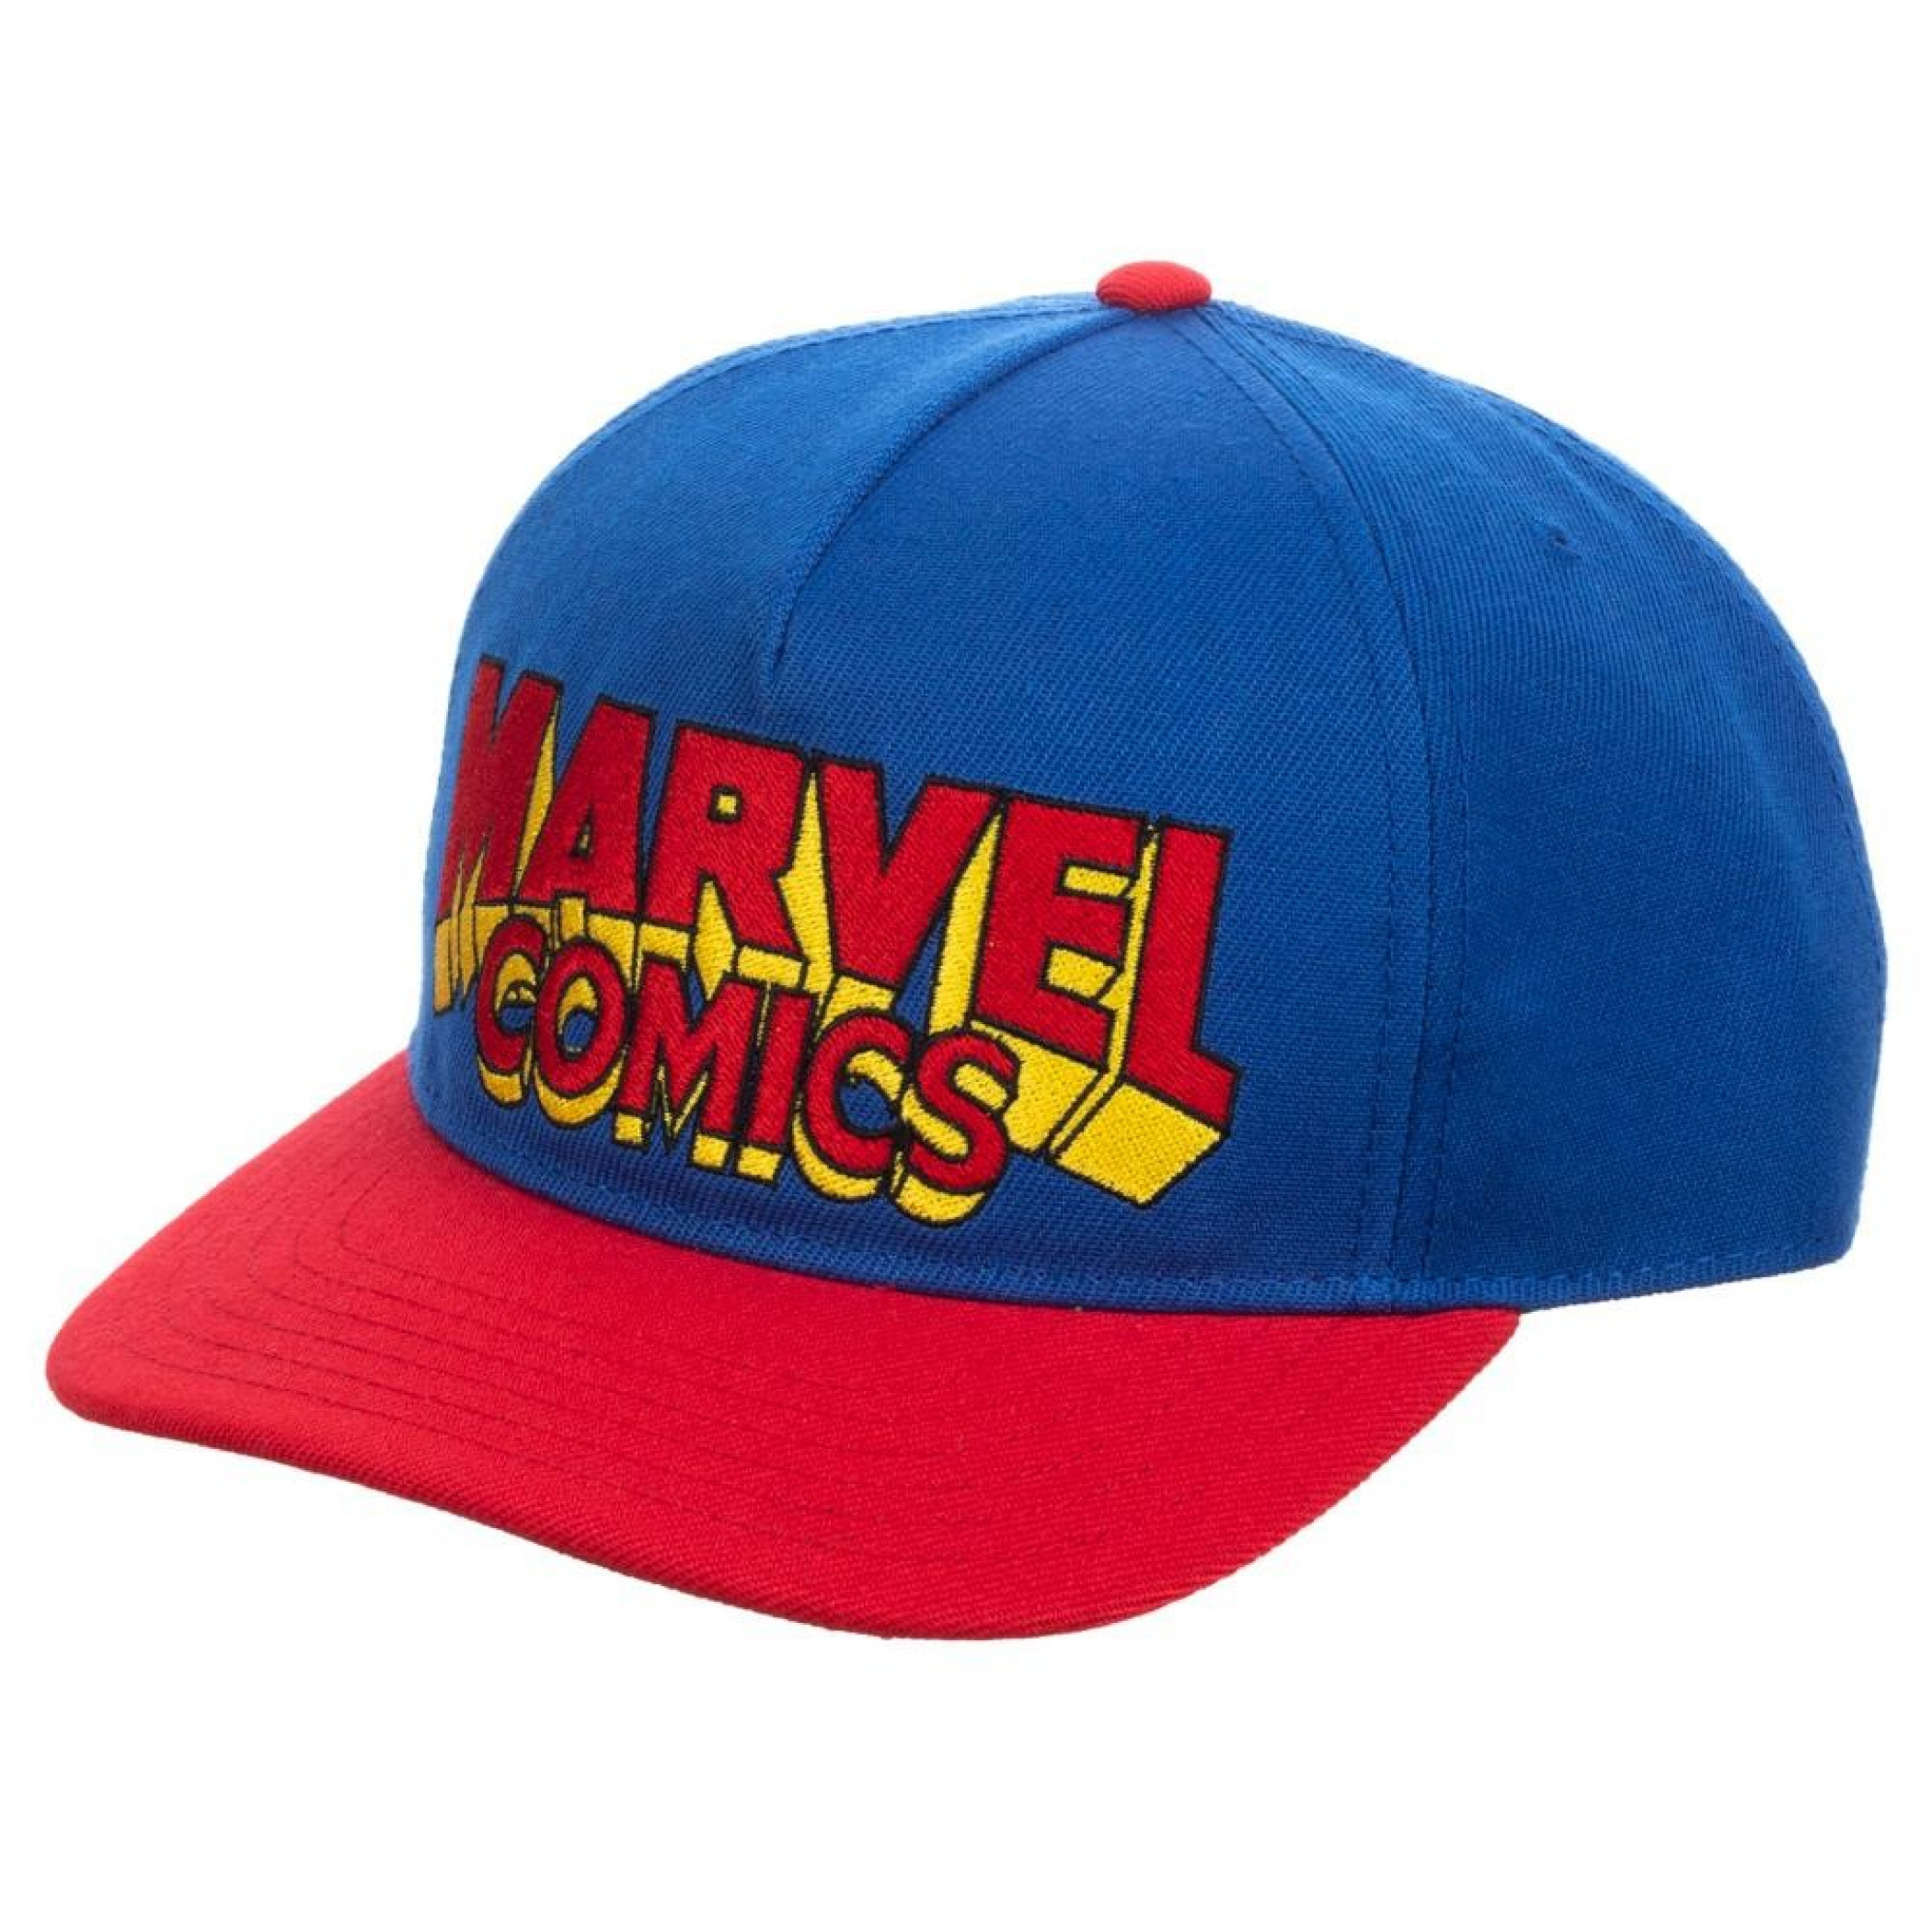 Marvel Comic Conventions Slouch Adjustable Snapback Hat